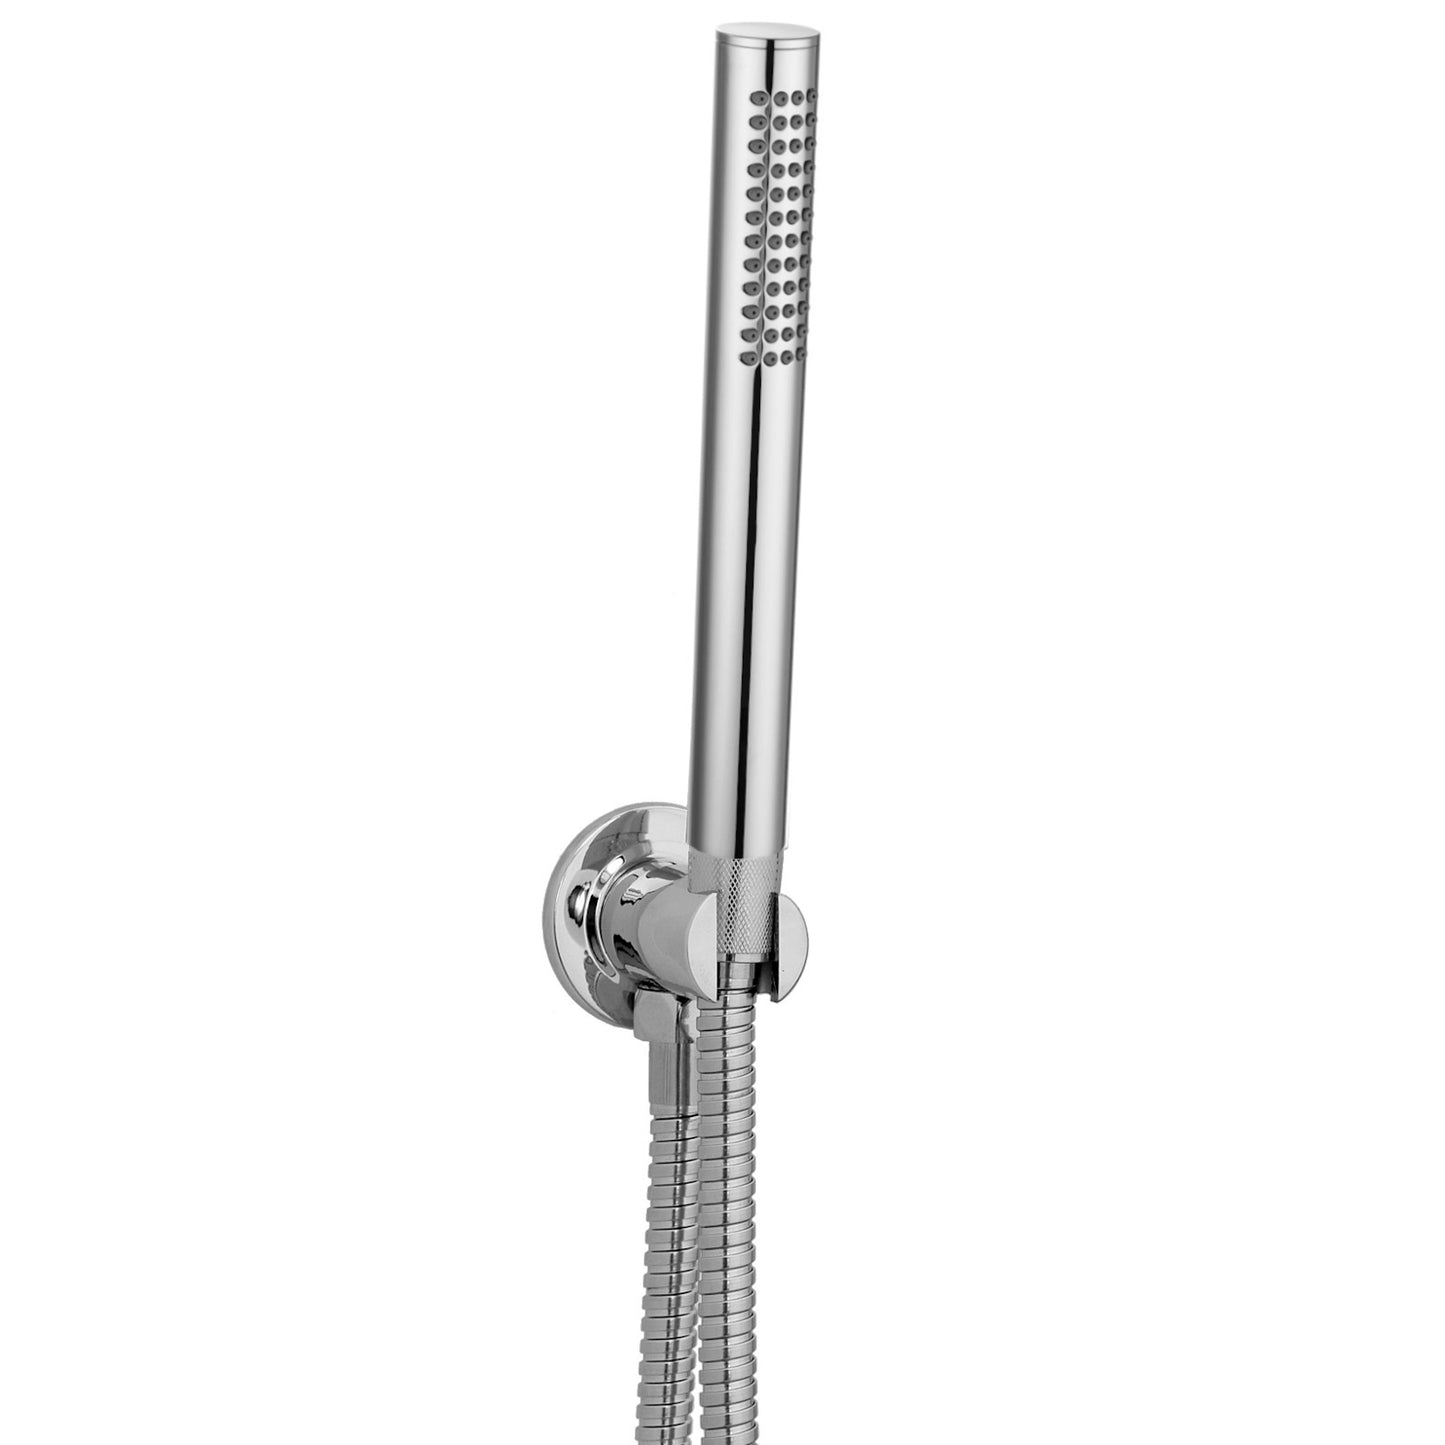 Venice Contemporary Round Concealed Thermostatic Shower Set Incl. Twin Valve, Wall Fixed 8" Shower Head, Handshower Kit - Chrome (2 Outlet)